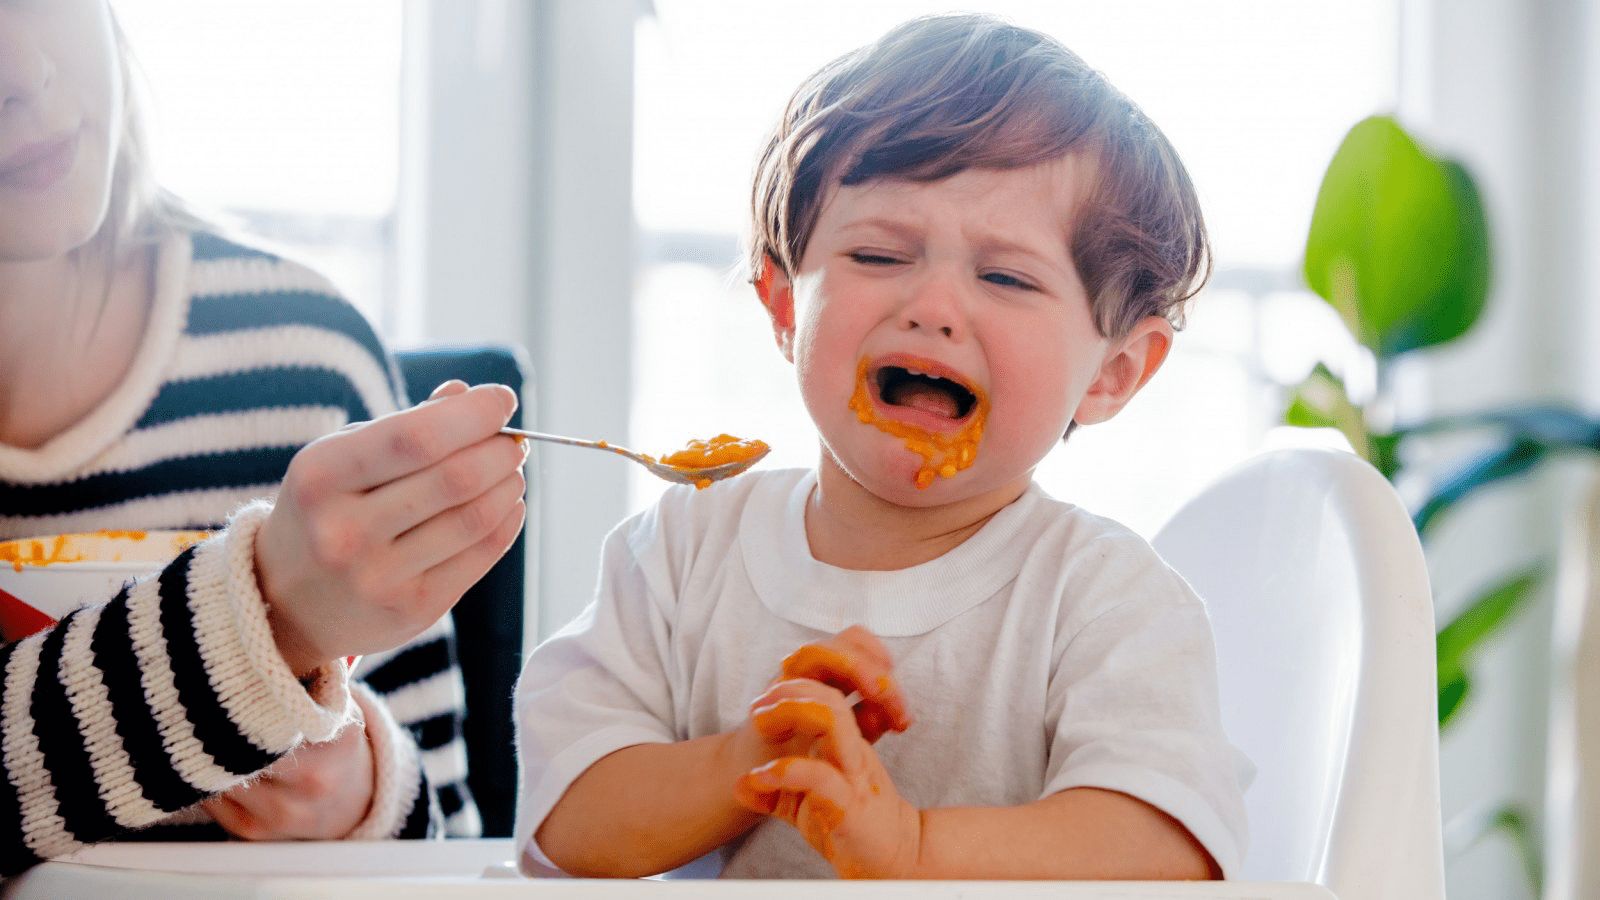 Forcing a child to eat may destroy their appetite and make them hate food. Source: Prince Abraham